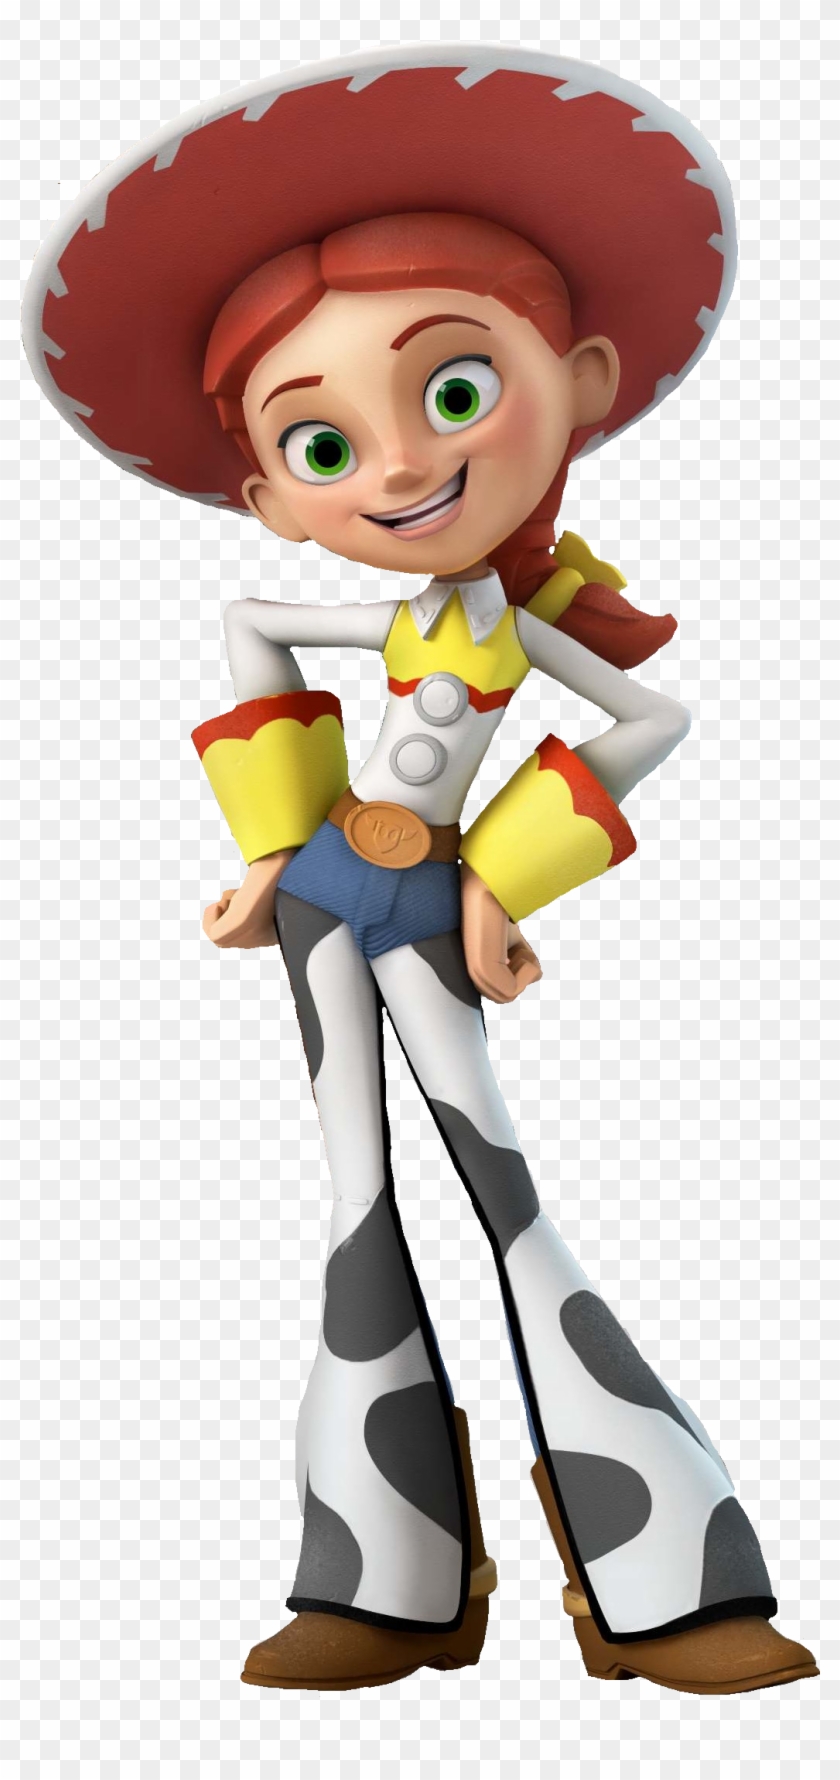 Images For > Toy Story Png Más - Jessie Toy Story Png #310275